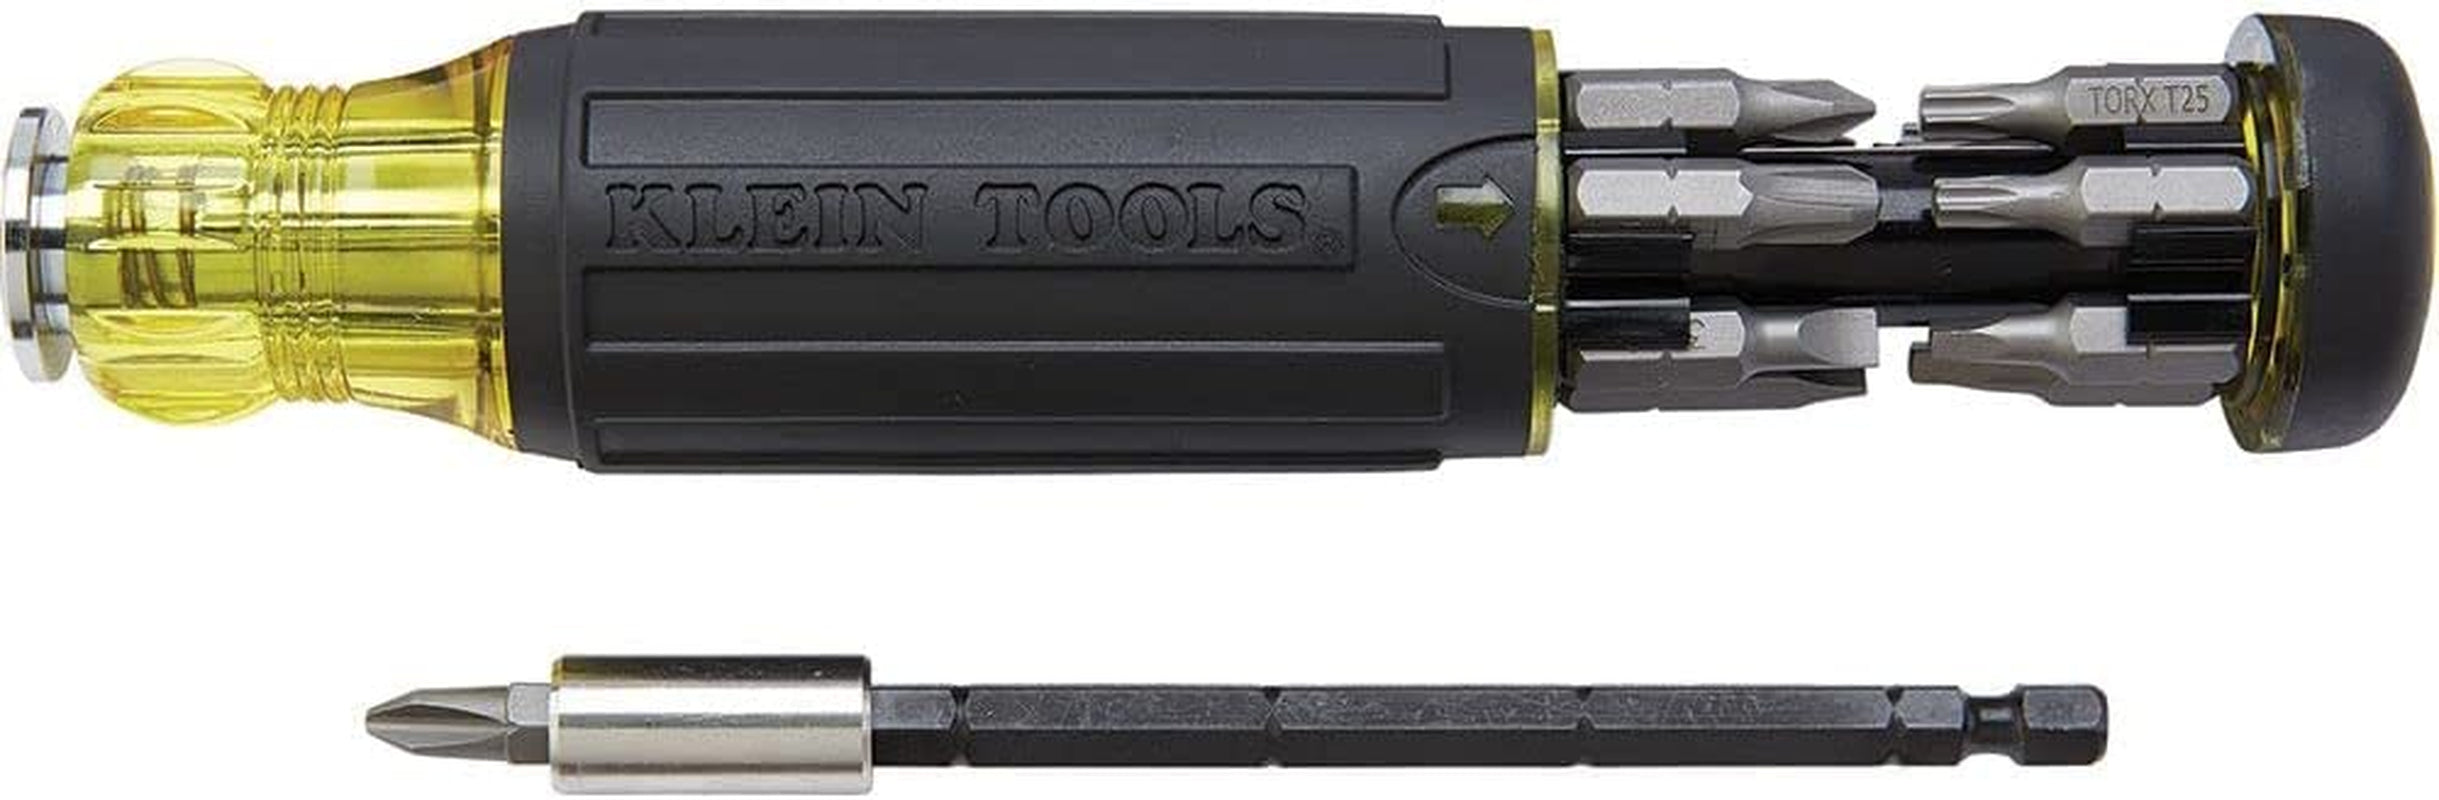 KLEIN TOOLS, Klein Tools 32303 Multi-Bit Screwdriver/Nut Driver, Impact Rated 14-In-1 Magnetic Screwdriver Set Phillips, Slotted, Square, Combo, Torx